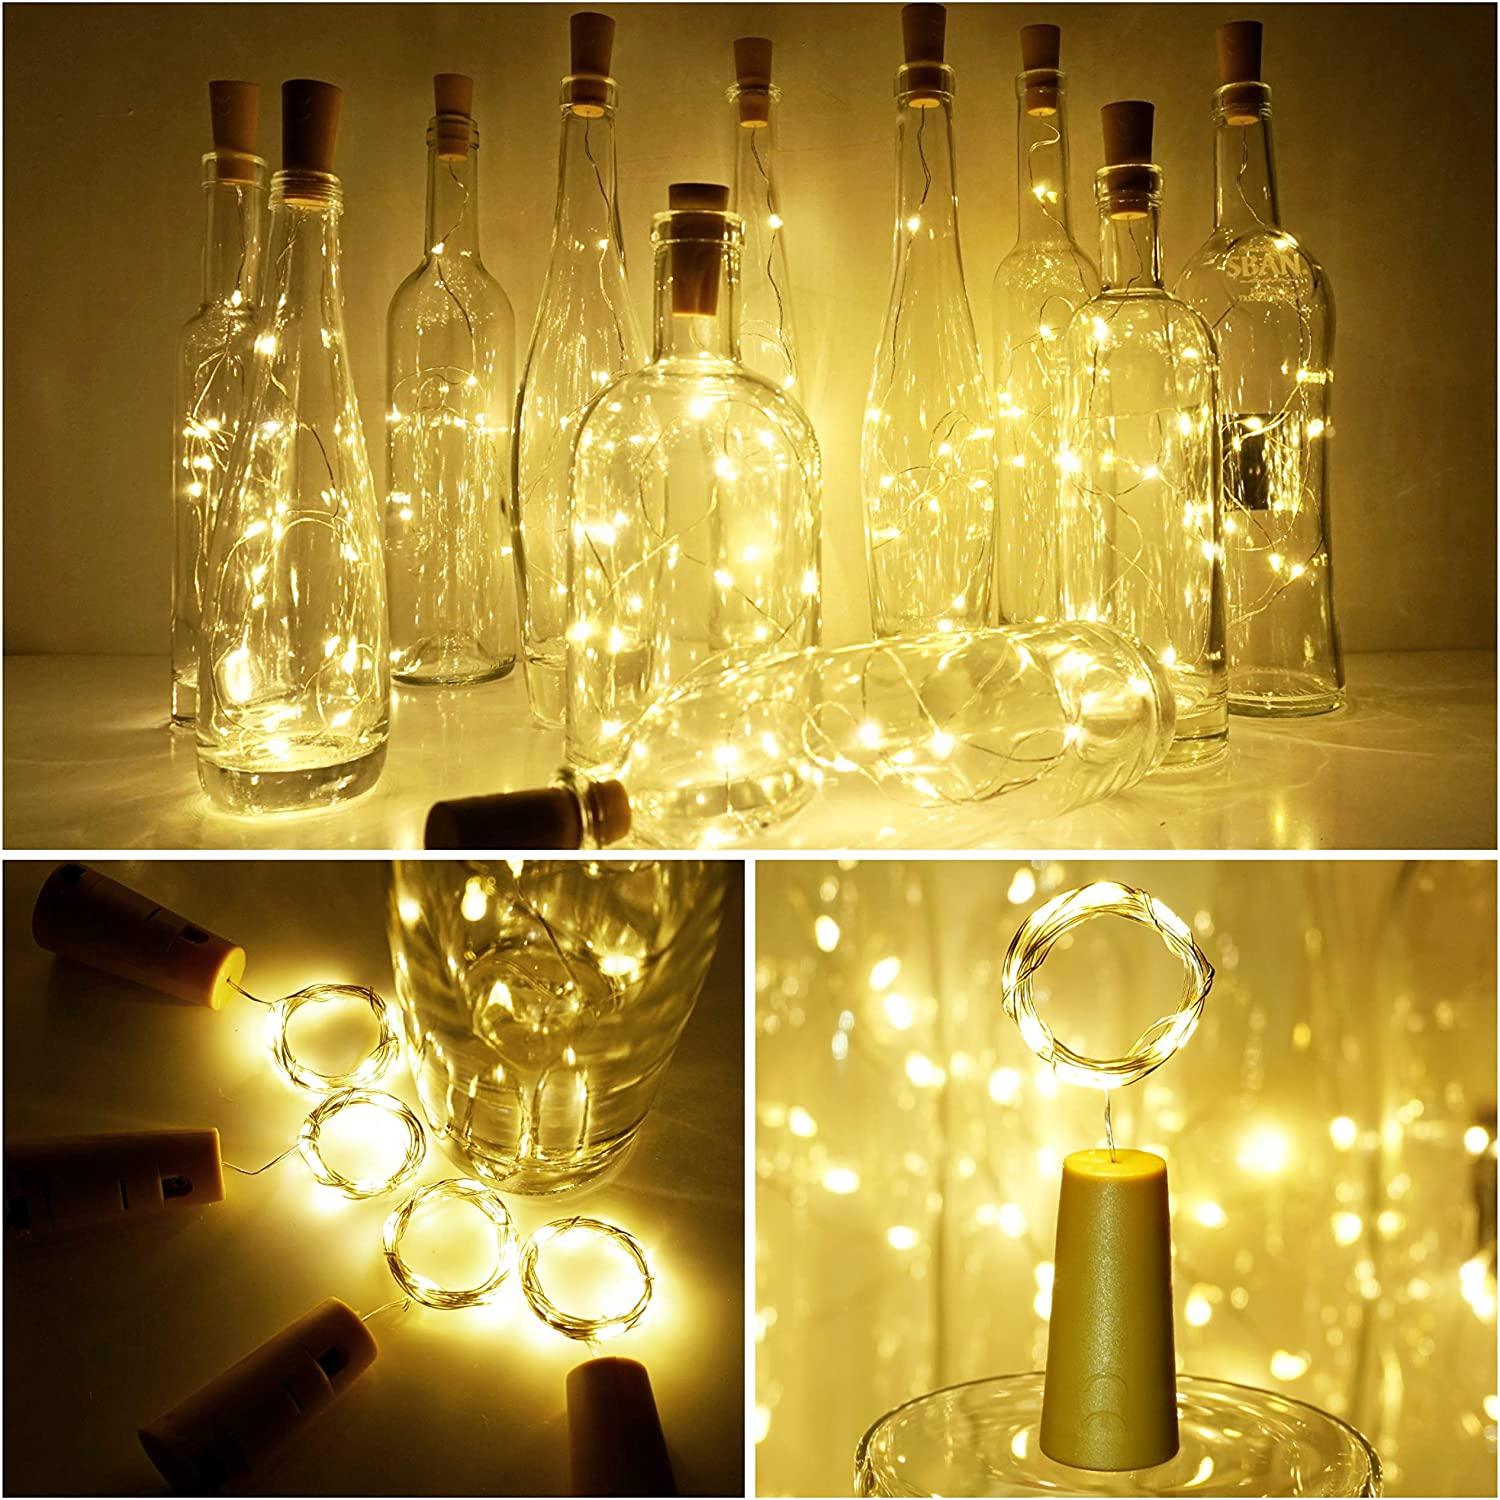 DIY String Light Ornaments for Tables - If you say i do